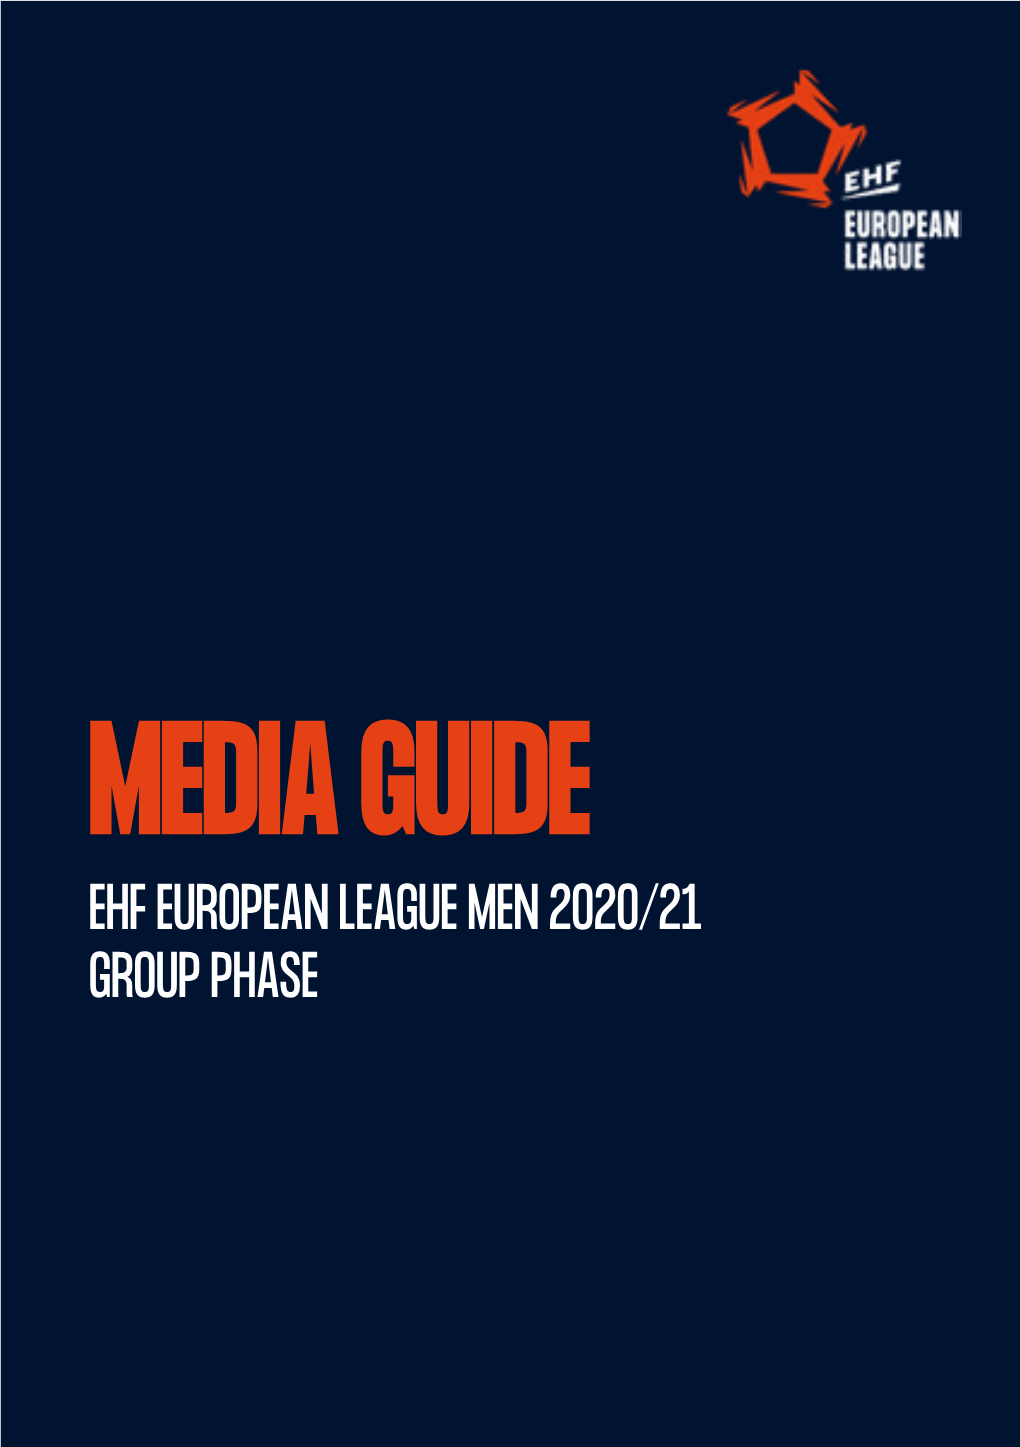 MEDIA INFORMATIONGUIDE DELOEHF EUROPEANEHF CHAMPIONS LEAGUE LEAGUE MEN 2020/21 2020/21 GROUPGROUP PHASE PHASE DRAW 27 June 2019, 18:00 Hrs Erste Campus, Vienna